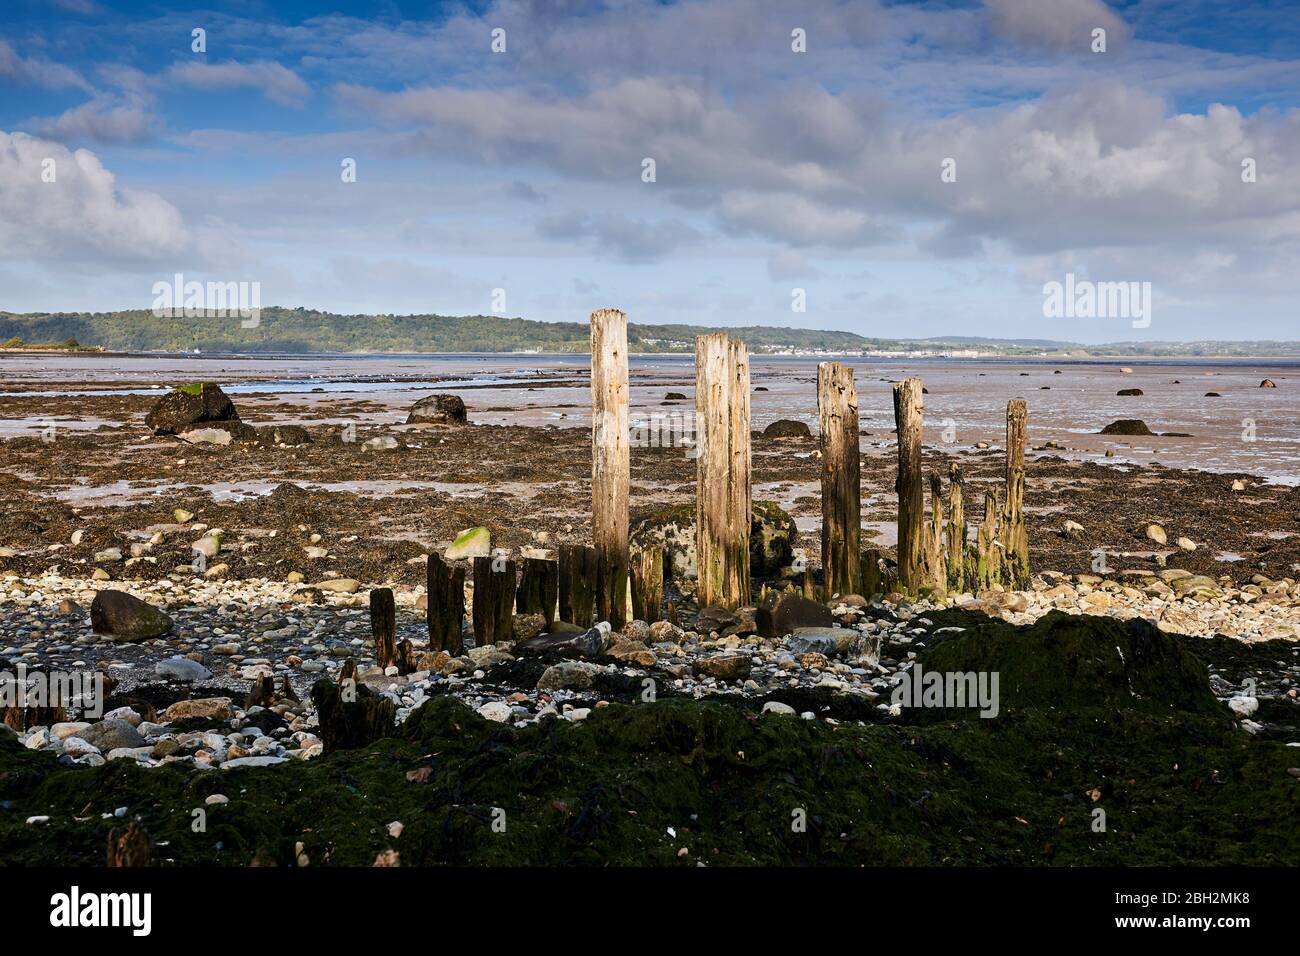 Weathered groynes in Gwynedd North Wales on the Aber coastline with the Menai Strait in the background Stock Photo